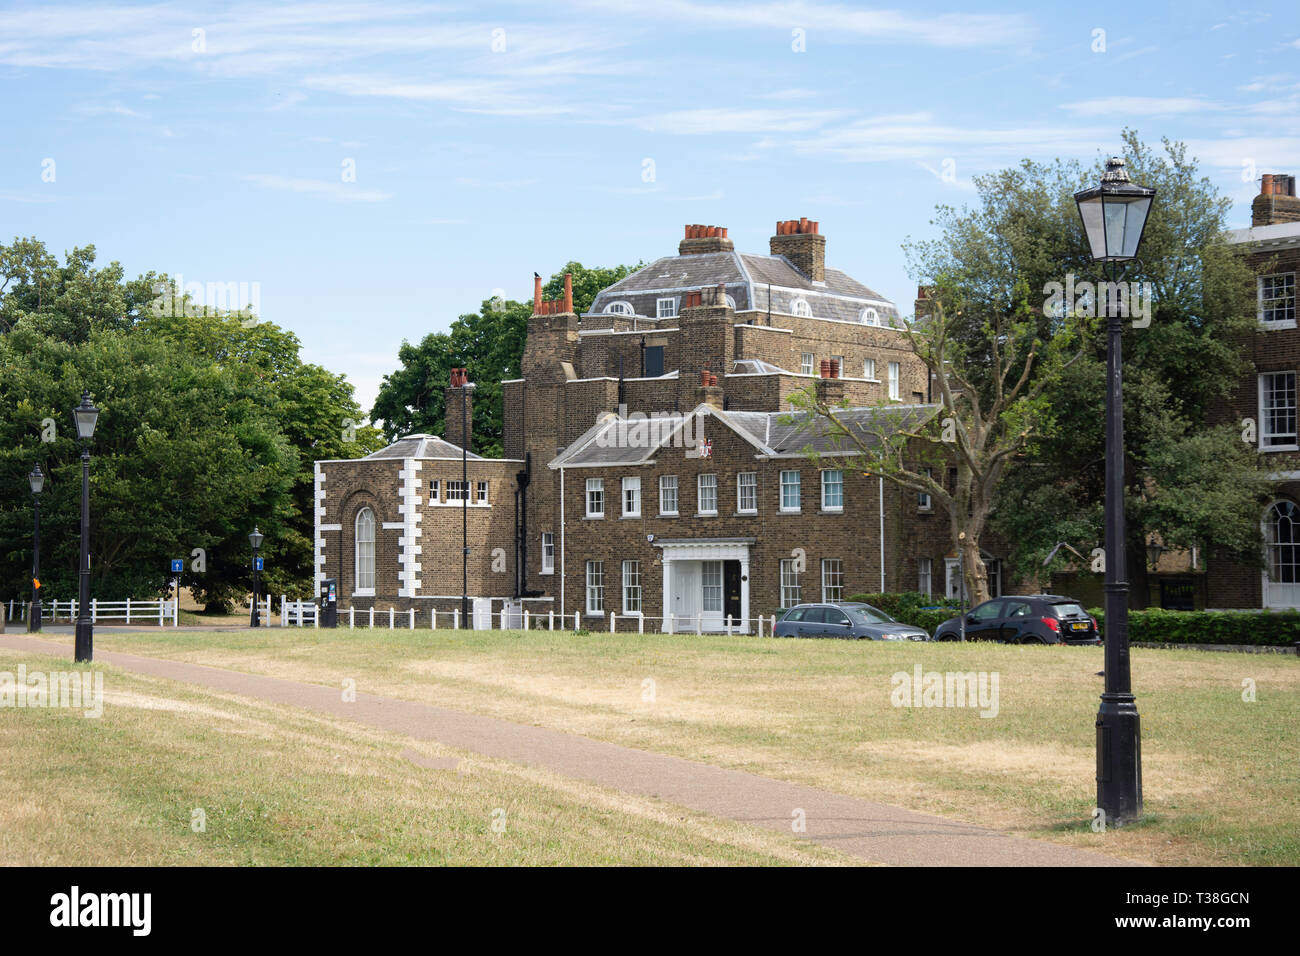 The Paragon listed building, Paragon Field, Blackheath, Royal Borough of Greenwich, Greater London, England, United Kingdom Stock Photo